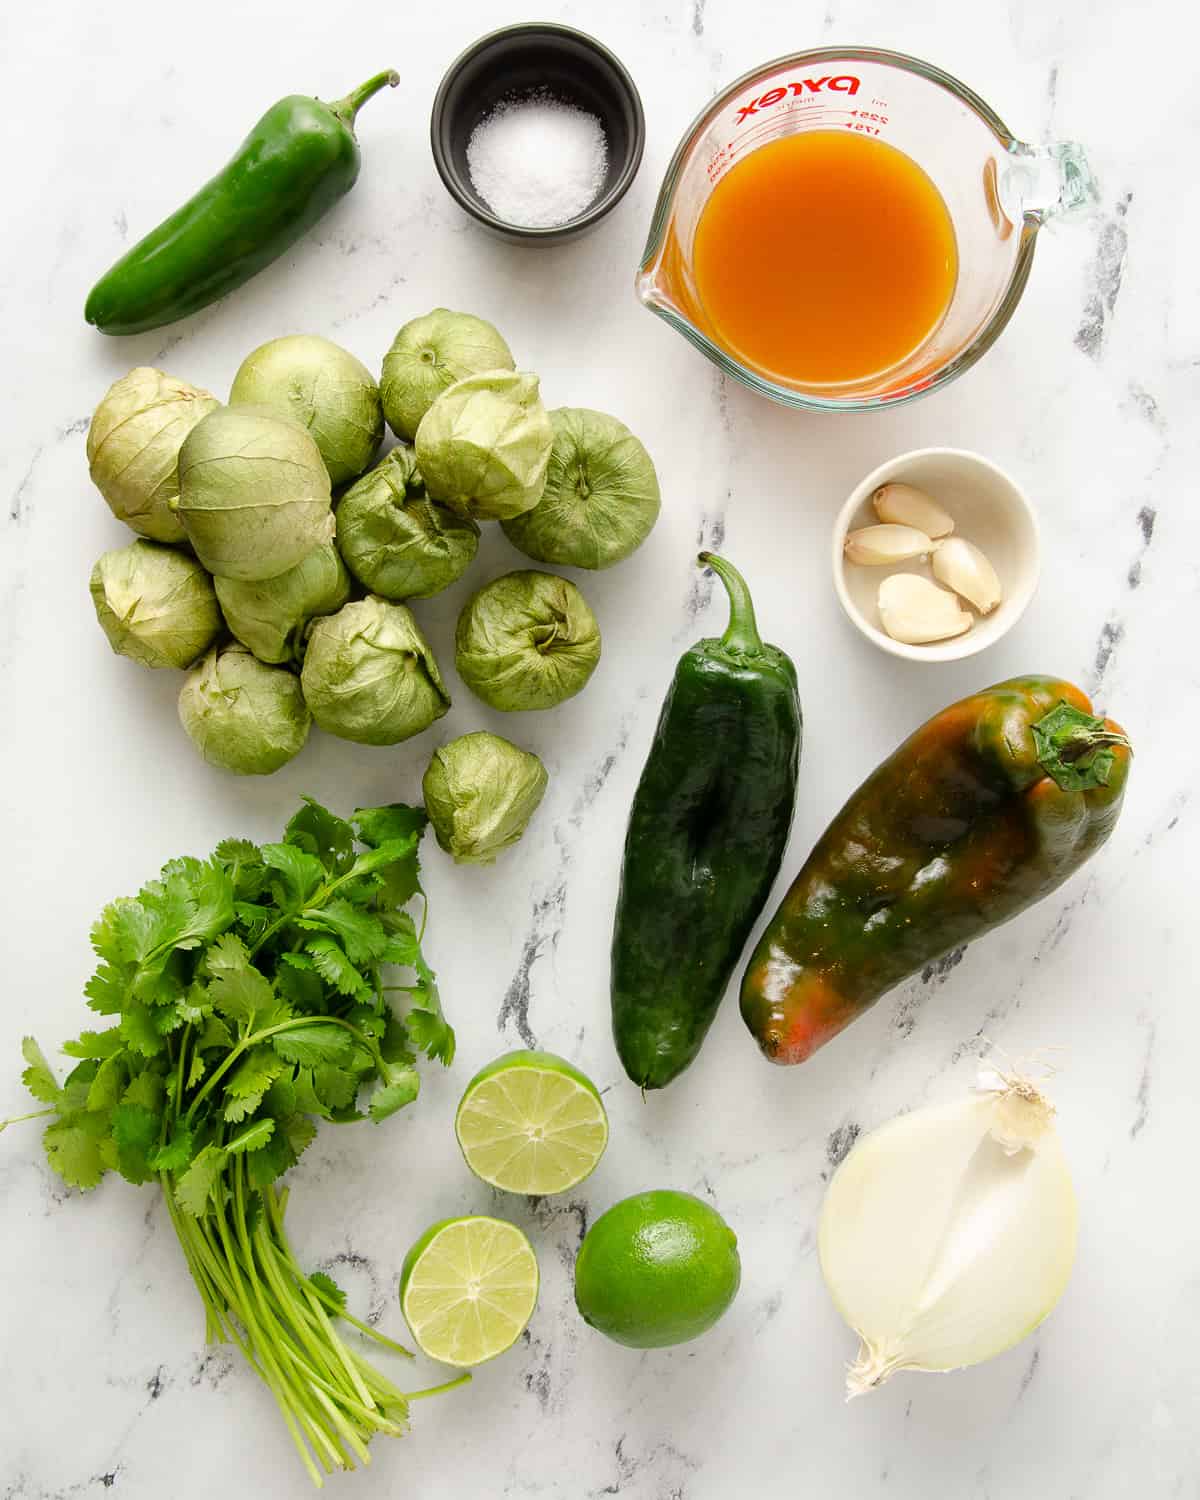 All the ingredients to make green enchilada sauce on a marble countertop.